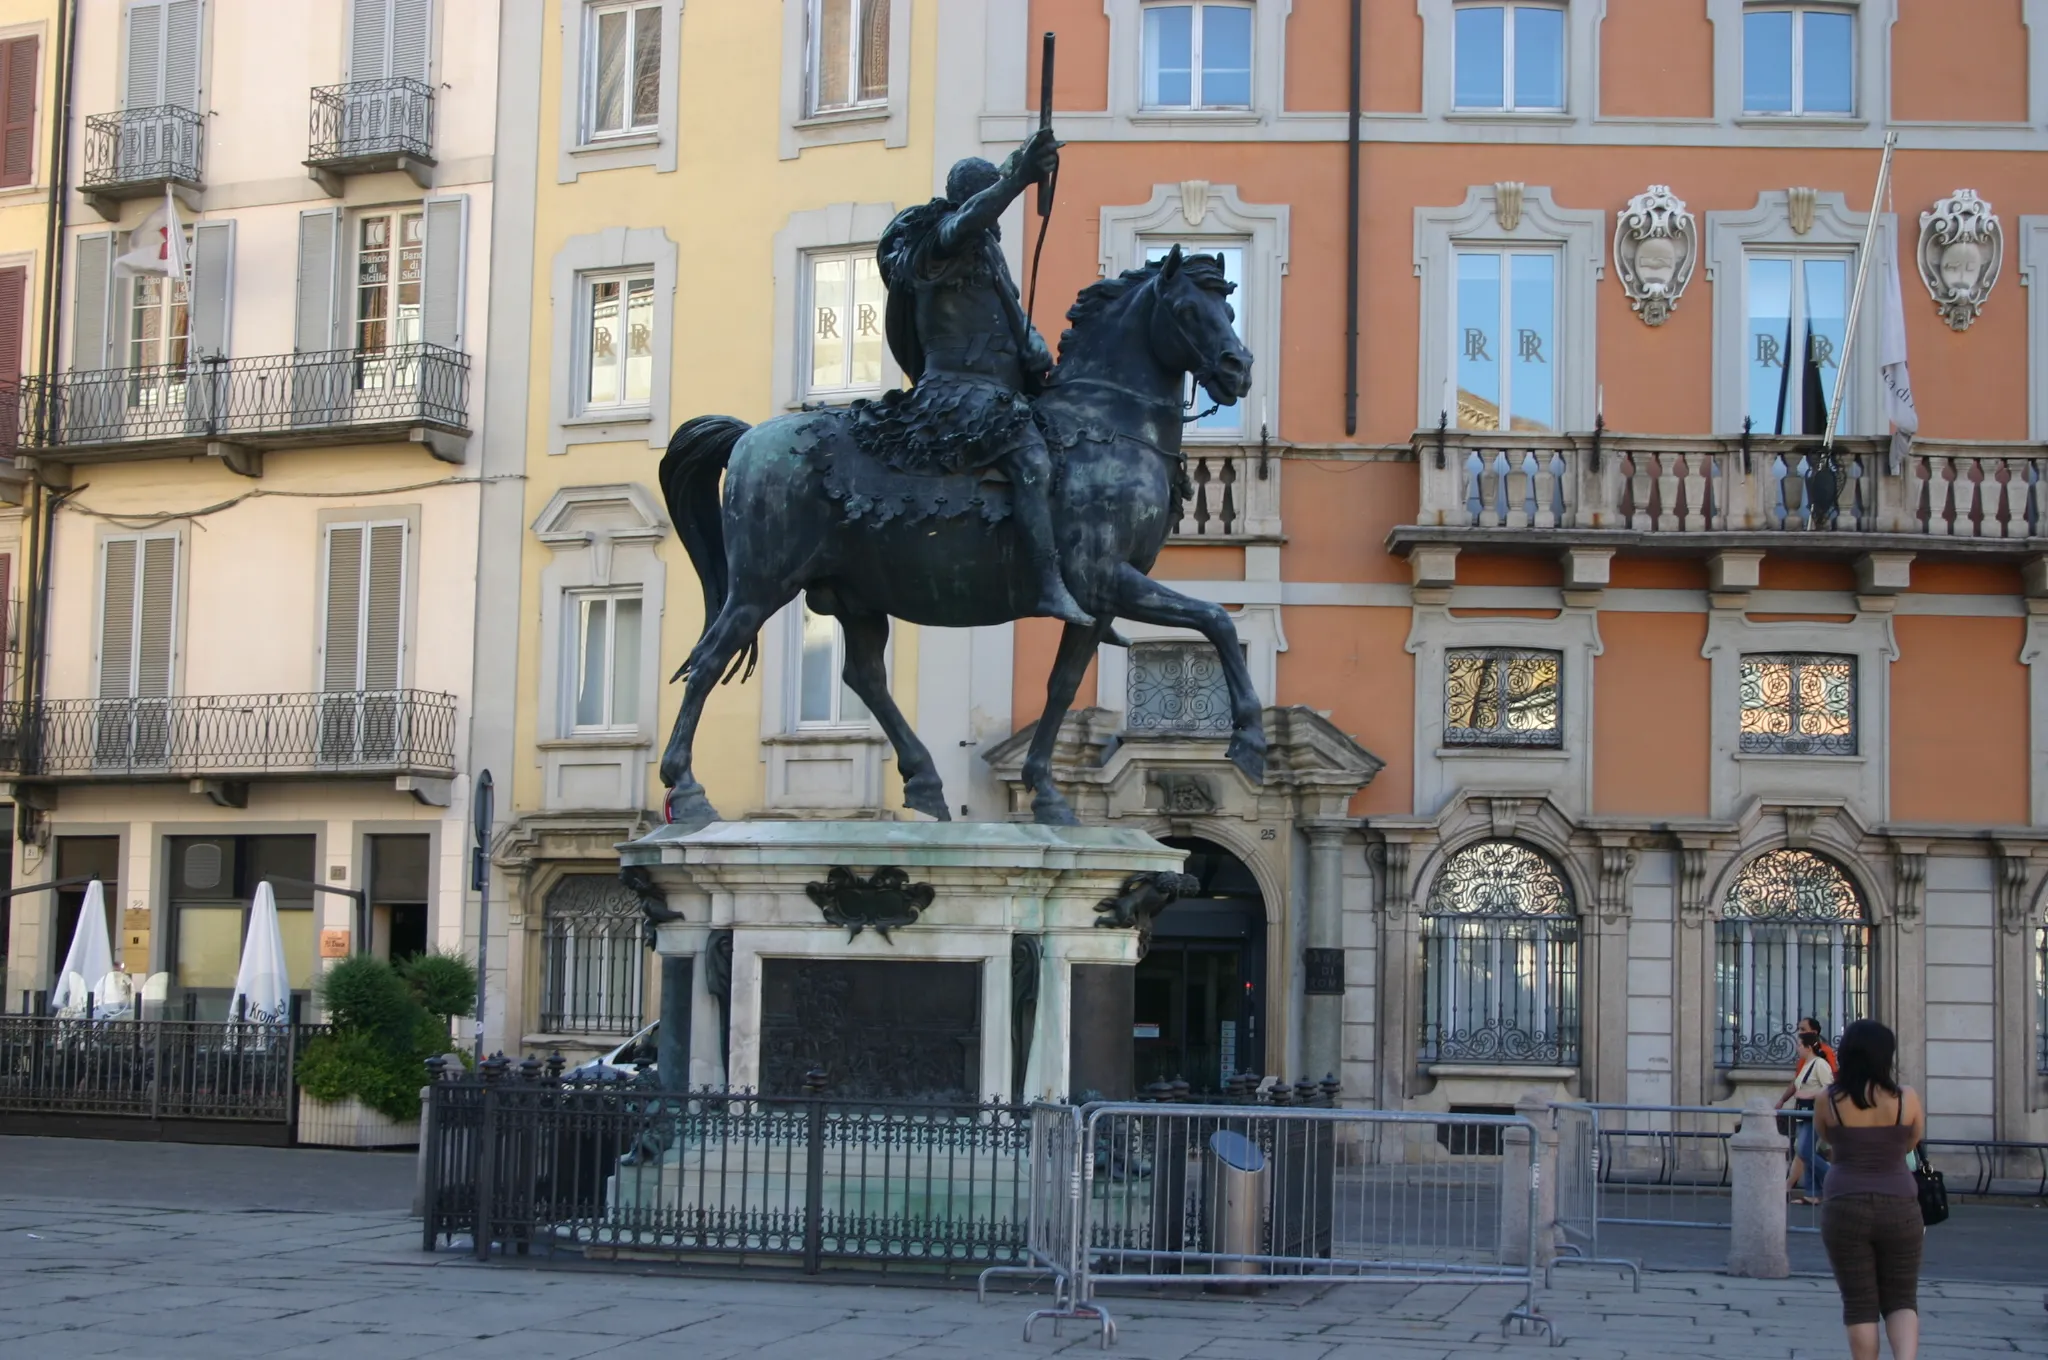 Photo showing: The bronze monument (dating from 1615) to Ranuccio I Farnese, duke of Parma and Piacenza, was created by Francesco Mochi (1580-1654). It stands in the main square, "Piazza dei cavalli", in Piacenza, Italy. Picture by Giovanni Dall'Orto, July 14 2007.